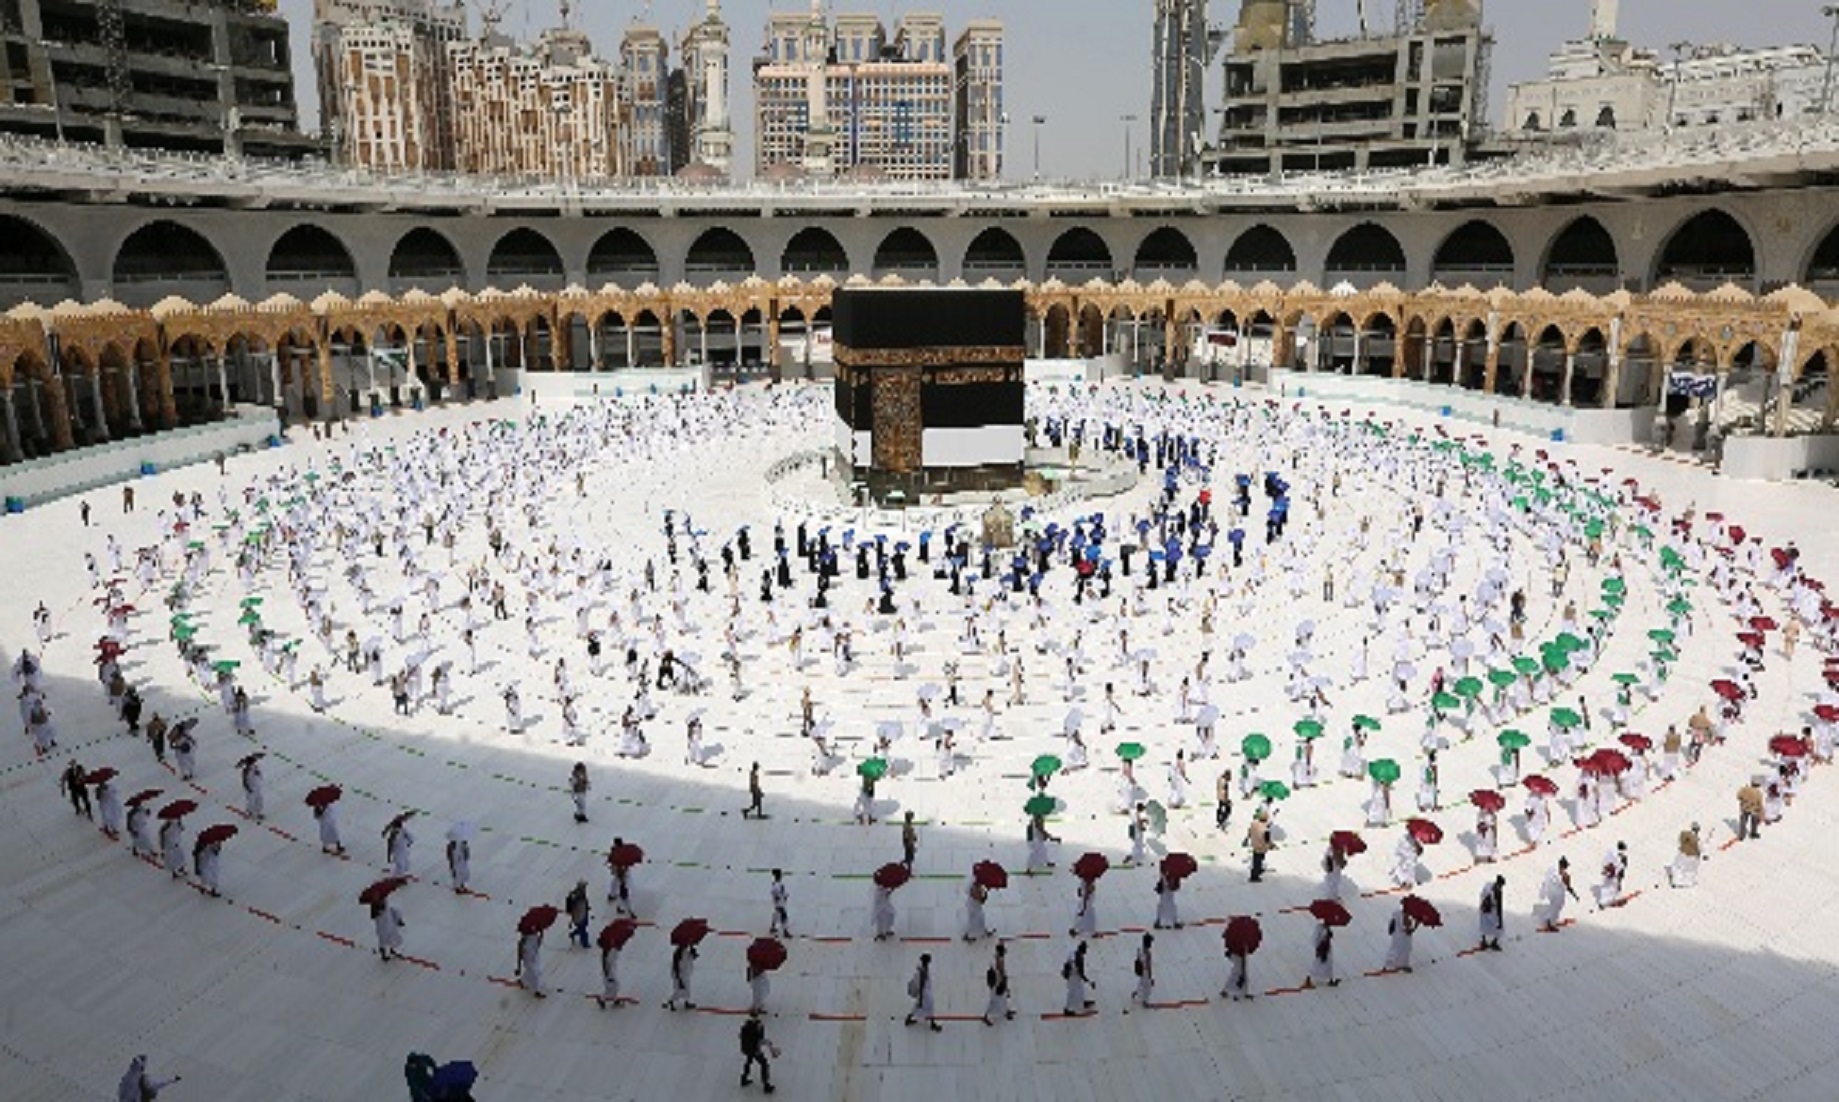 Malaysia Announces Temporary Suspension Of Umrah Travel From Jan 8 Over Omicron Concerns